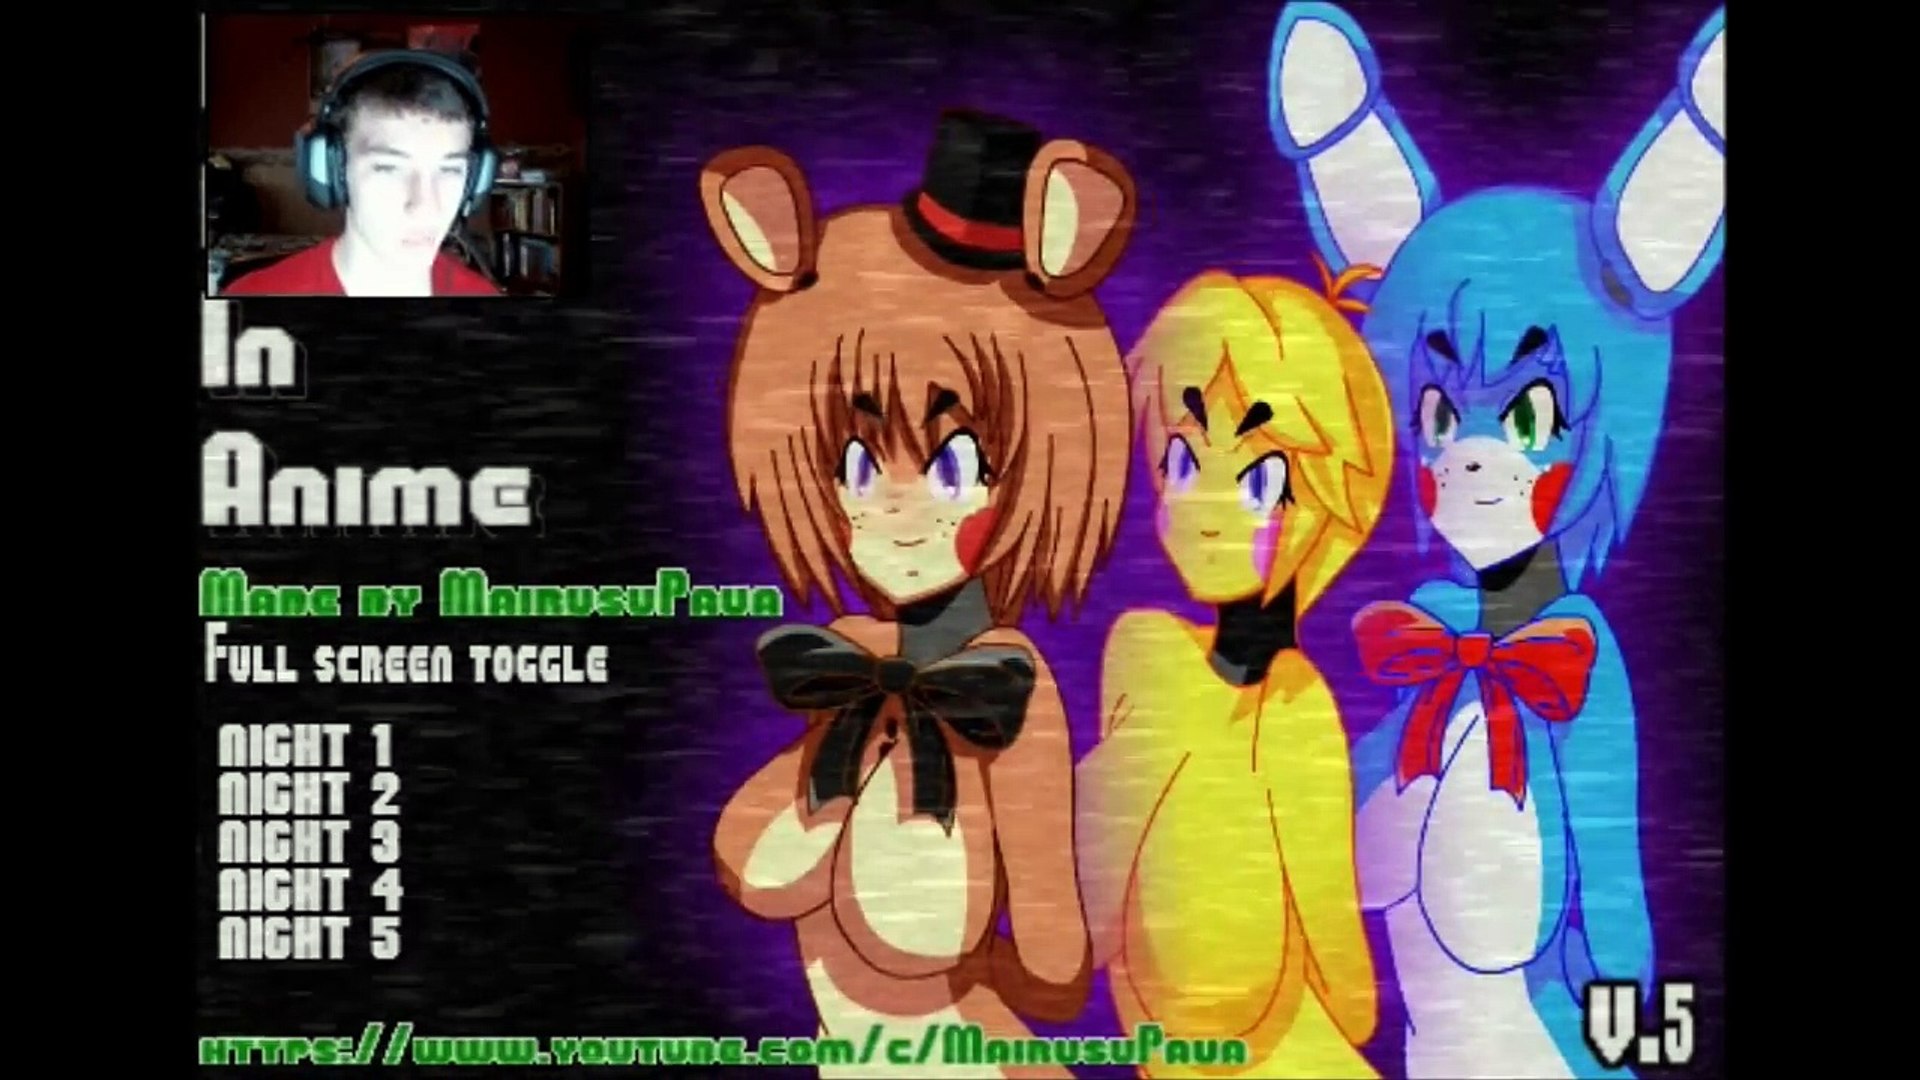 Five Nights in Anime 3D  The Sussy Animatronics Are Acting Sus! 